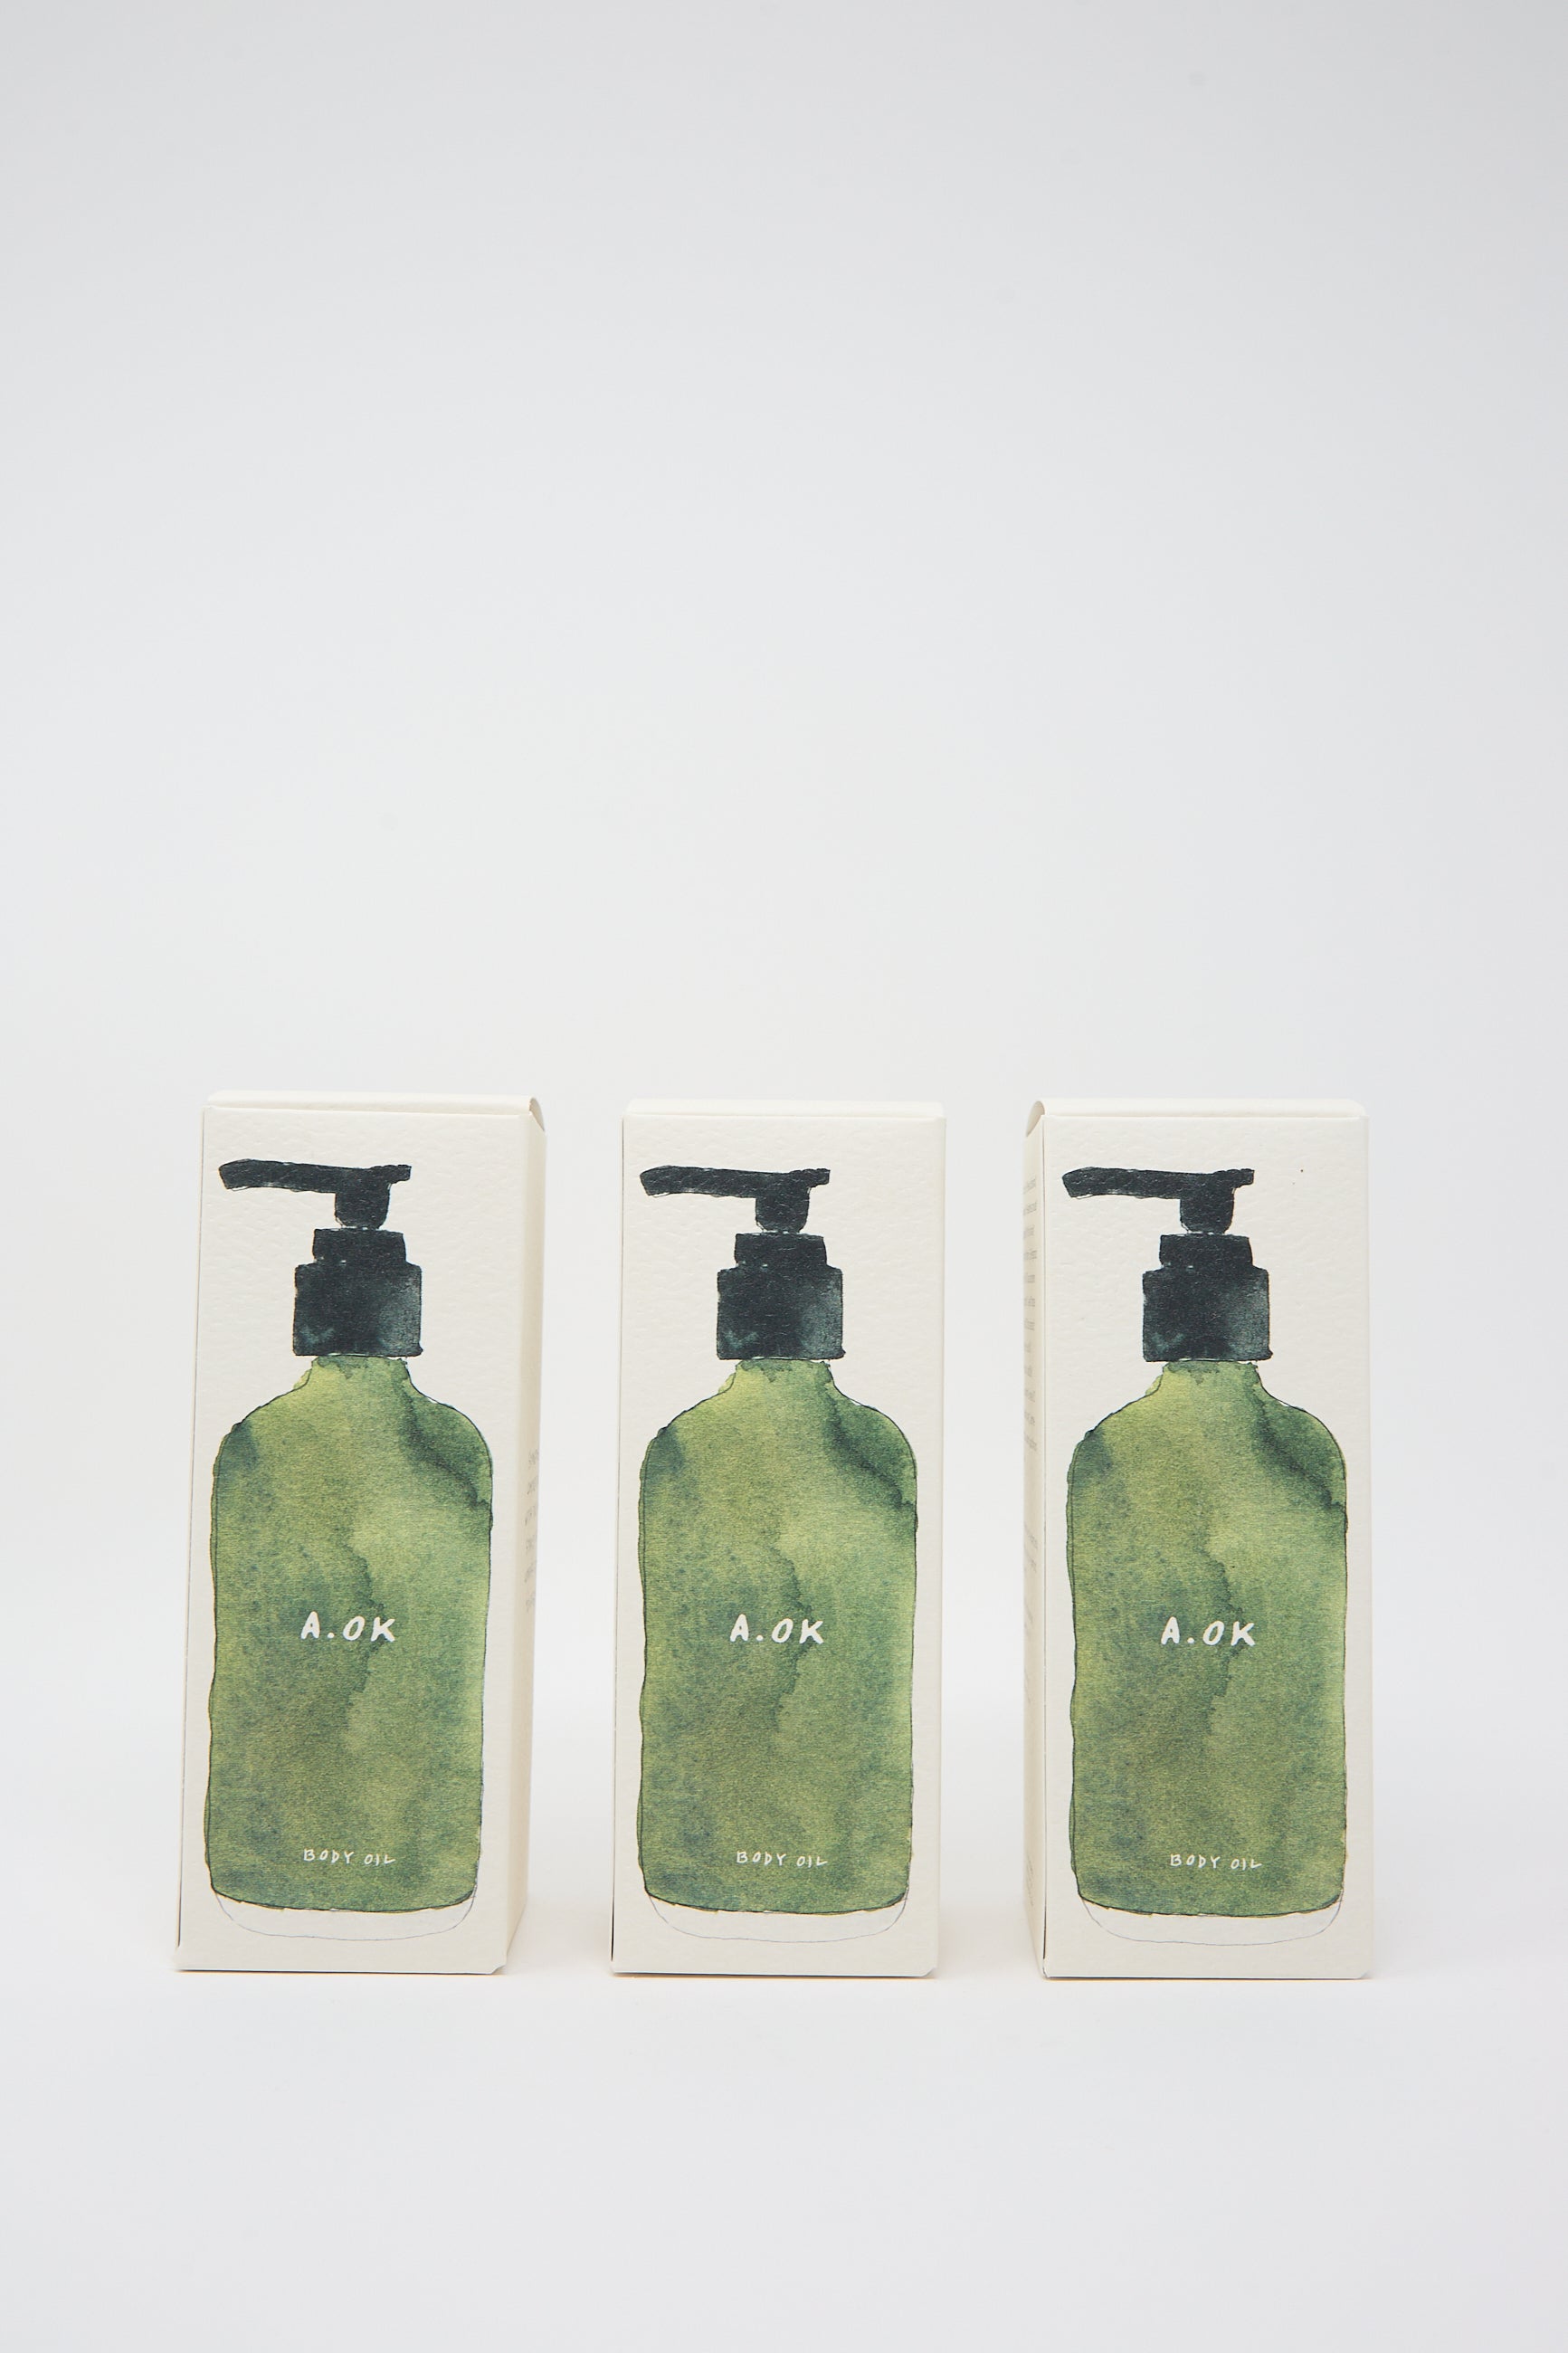 Three green pump bottles labeled "A.OK" are shown in a row against a plain white background, each containing Botanical Body Oil with a refreshing unisex aroma.